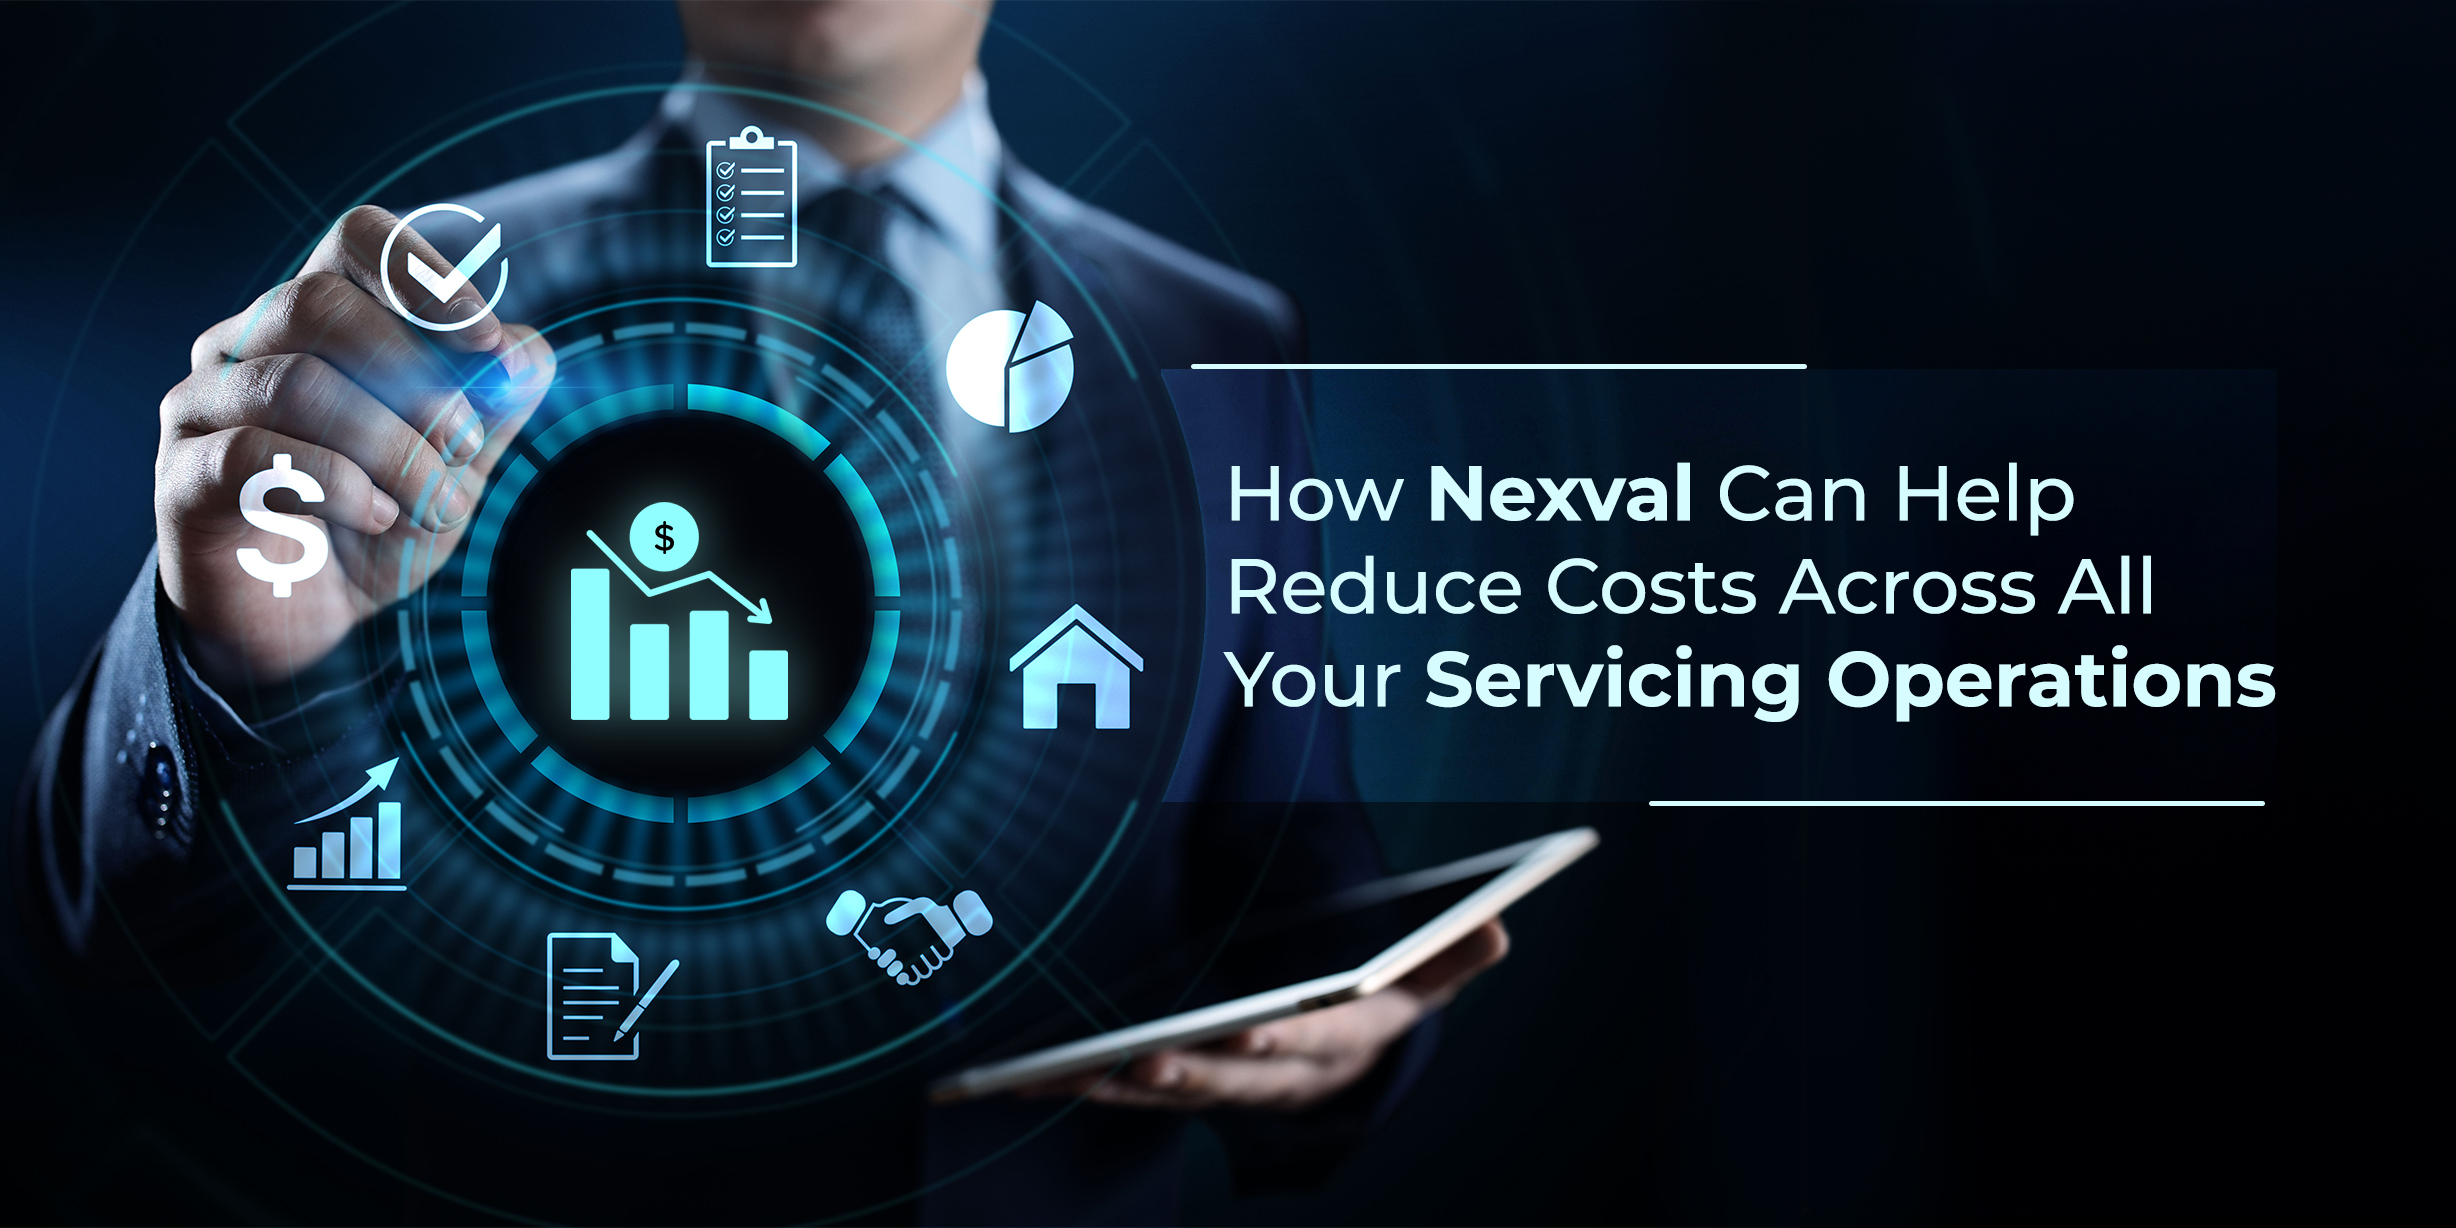 How Nexval Can Help Reduce Costs Across All Your Servicing Operations